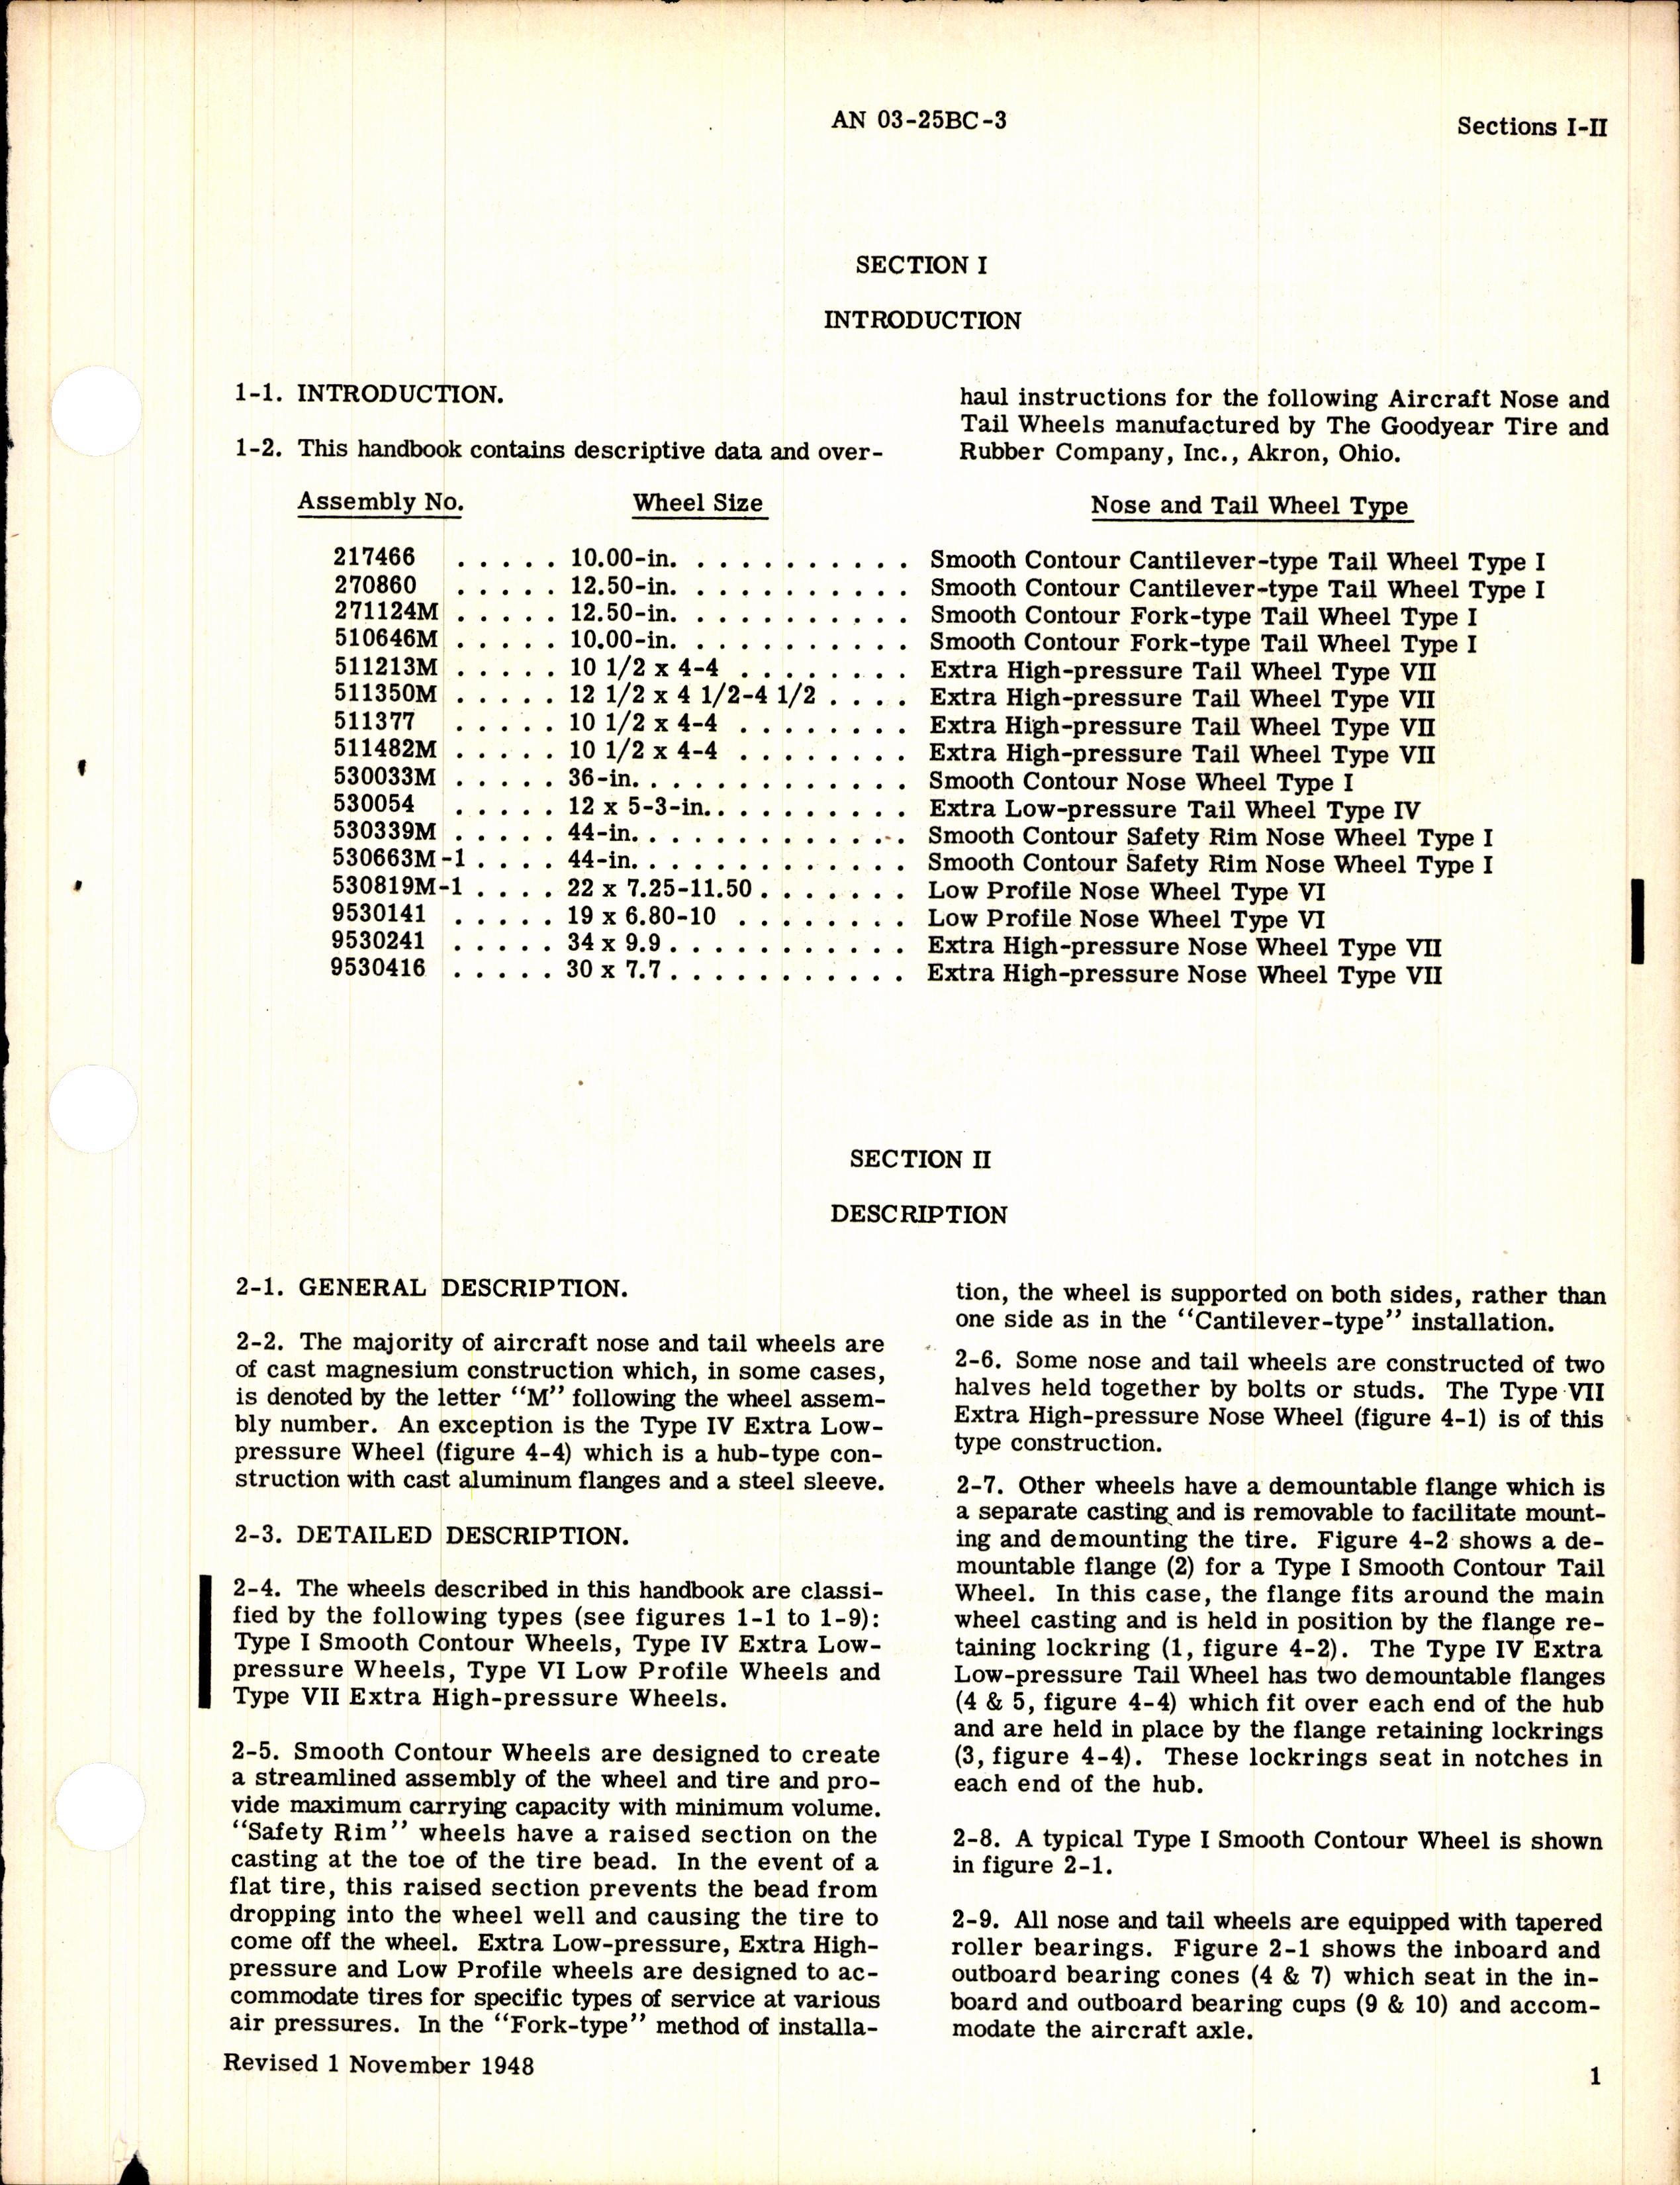 Sample page 5 from AirCorps Library document: Overhaul Instructions for Goodyear Nose and Tail Wheels